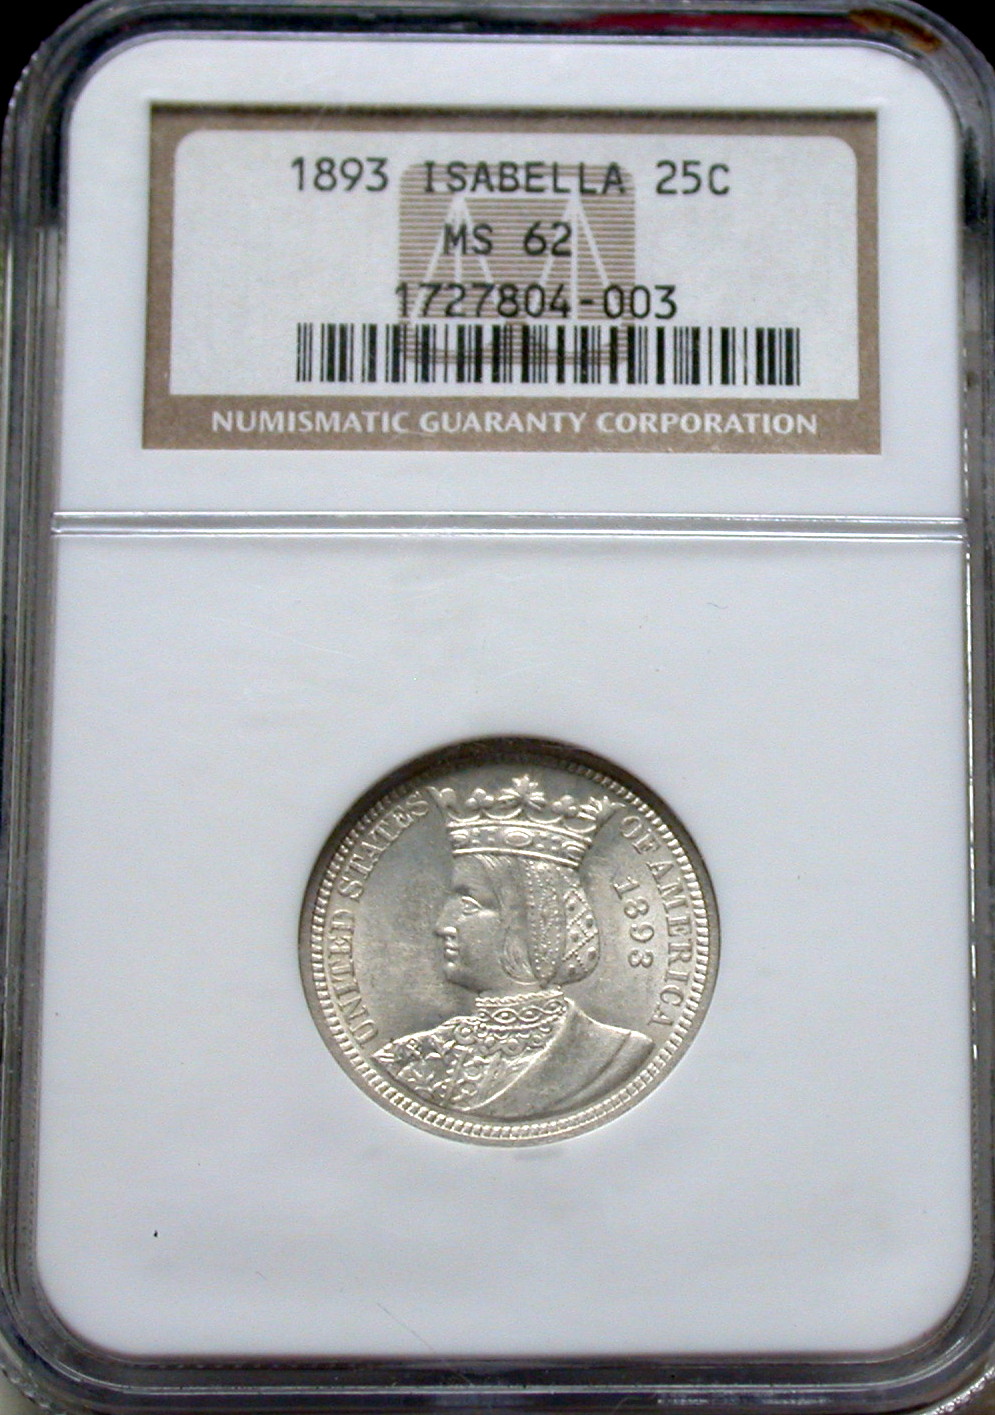 1893 Isabella quarter, NGC Certified MS 62! - Click Image to Close